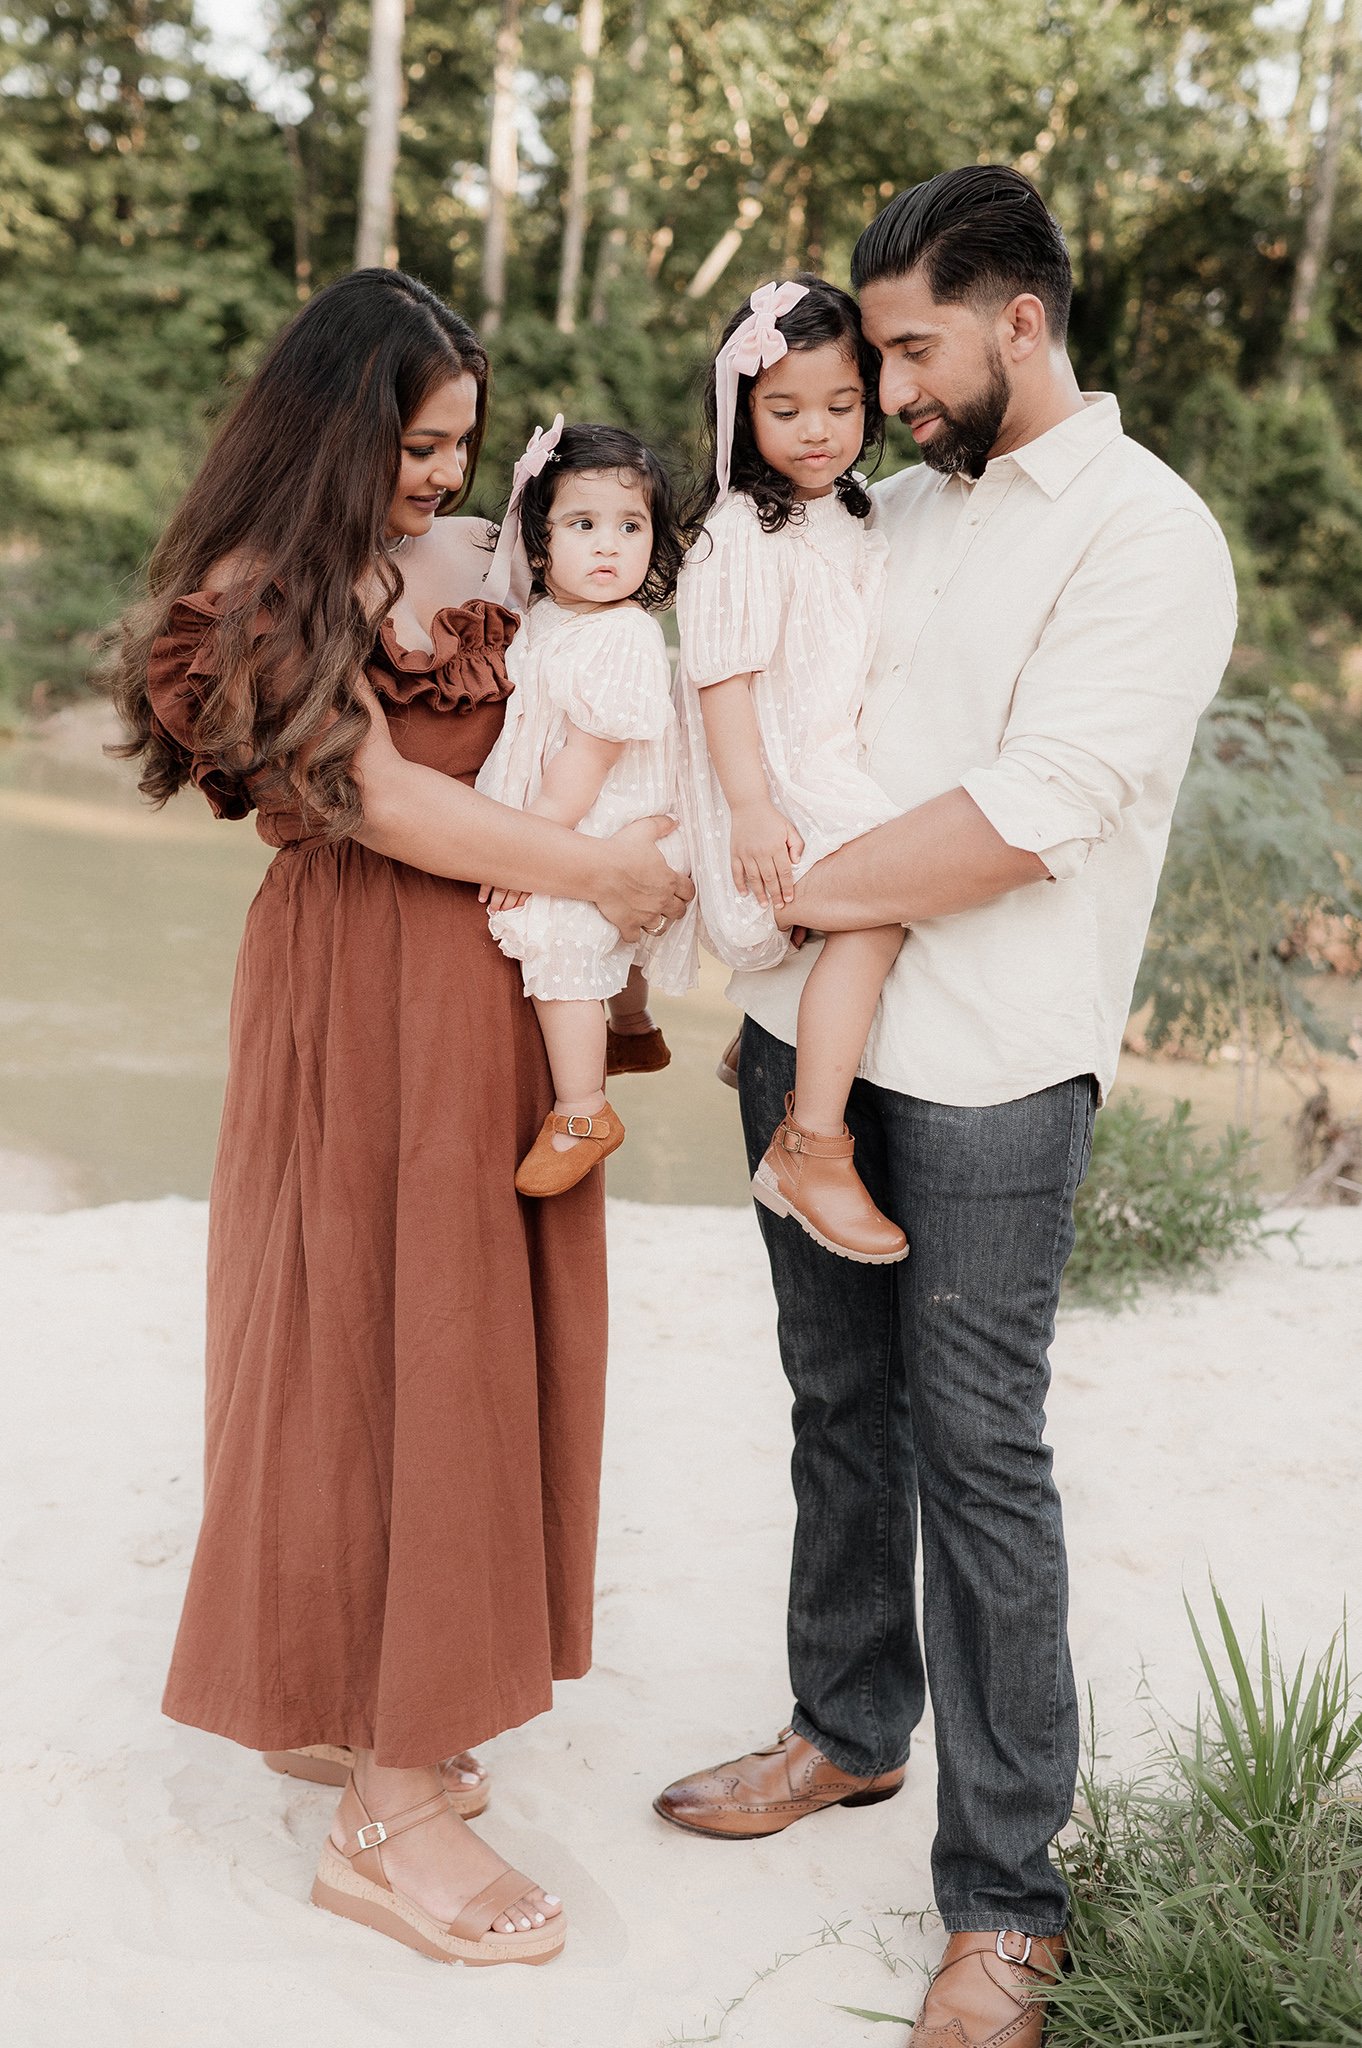 the woodlands family photographer _ conroe photographer _ houston family photographer _ ashley gillen photography _ texas family photographer _ conroe wedding photographer _ conroe texas _ cshi18.jpg